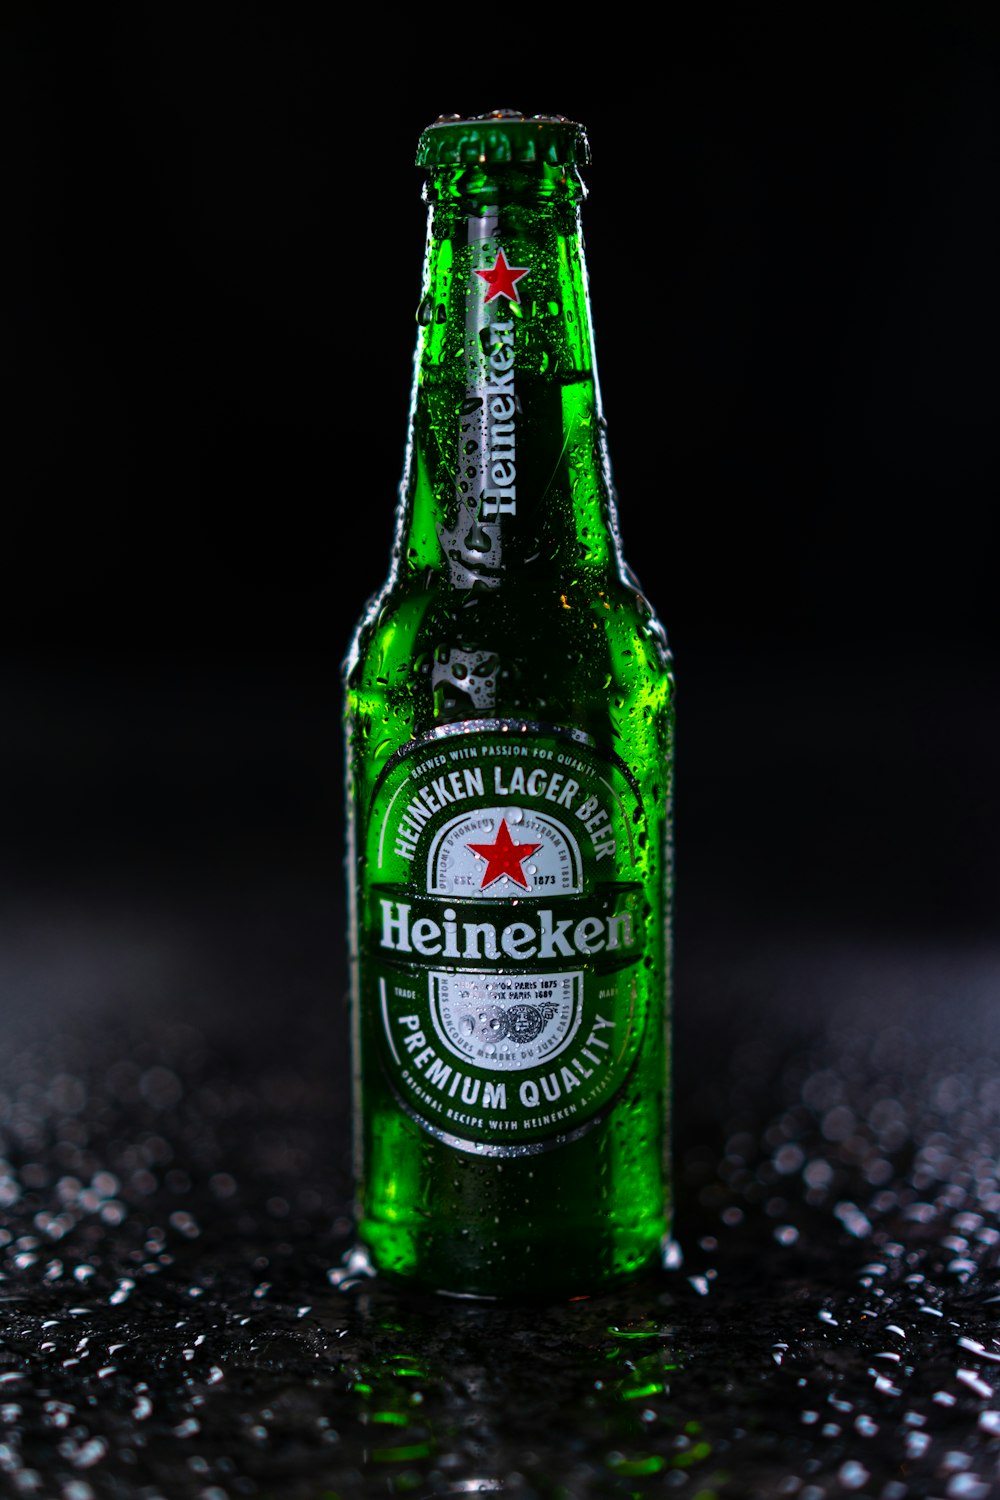 750+ [HQ] Beer Bottle Pictures | Download Free Images & Stock Photos on  Unsplash